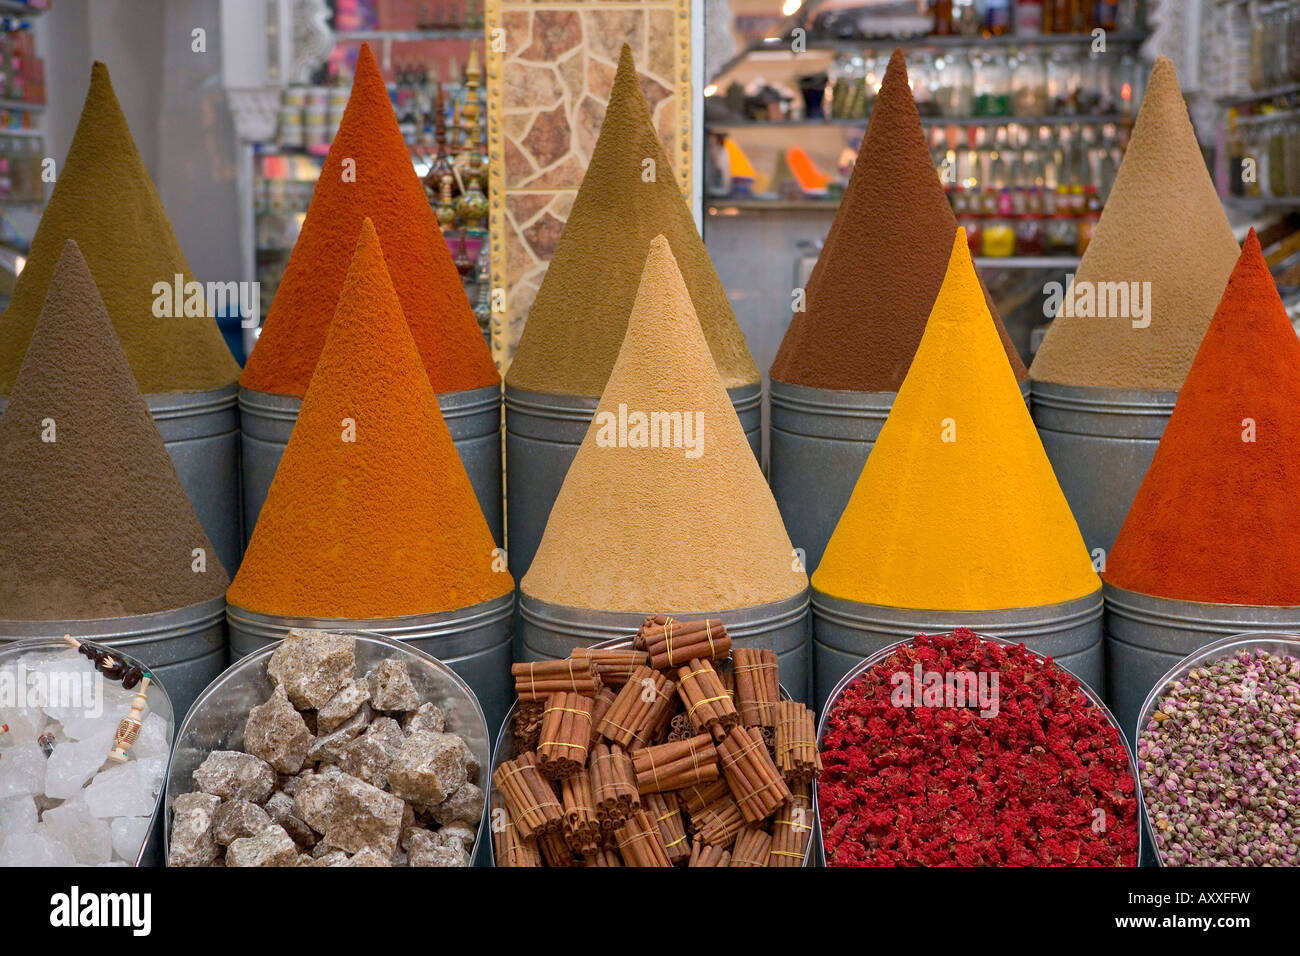 Spices for sale, Mellah district, Marrakesh (Marrakech), Morocco, North Africa, Africa Stock Photo